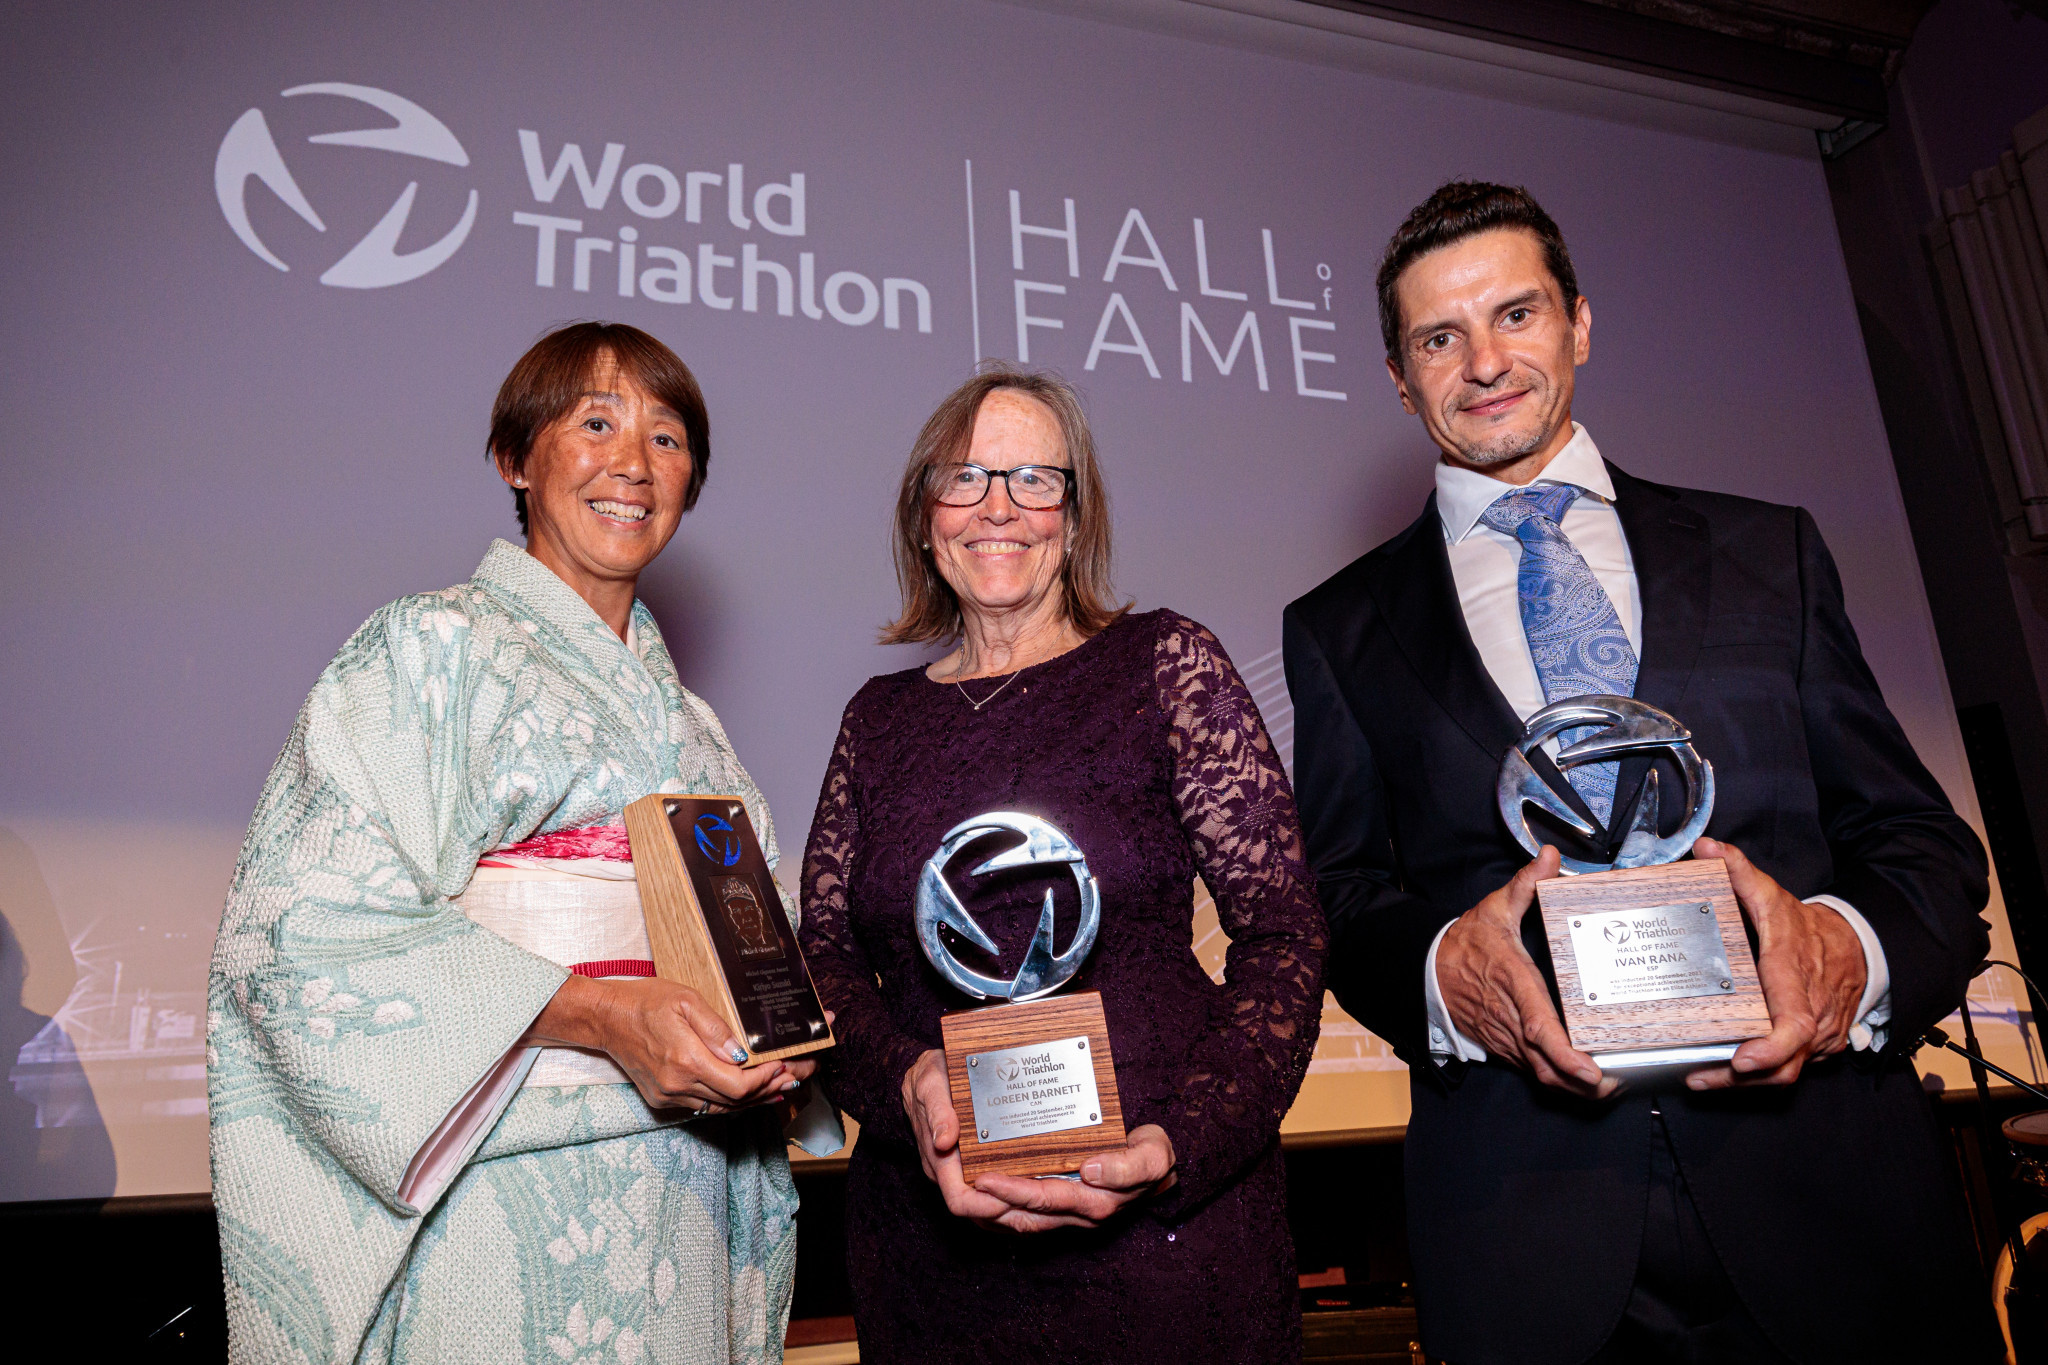 Two world champions and two officials inducted to World Triathlon Hall of Fame